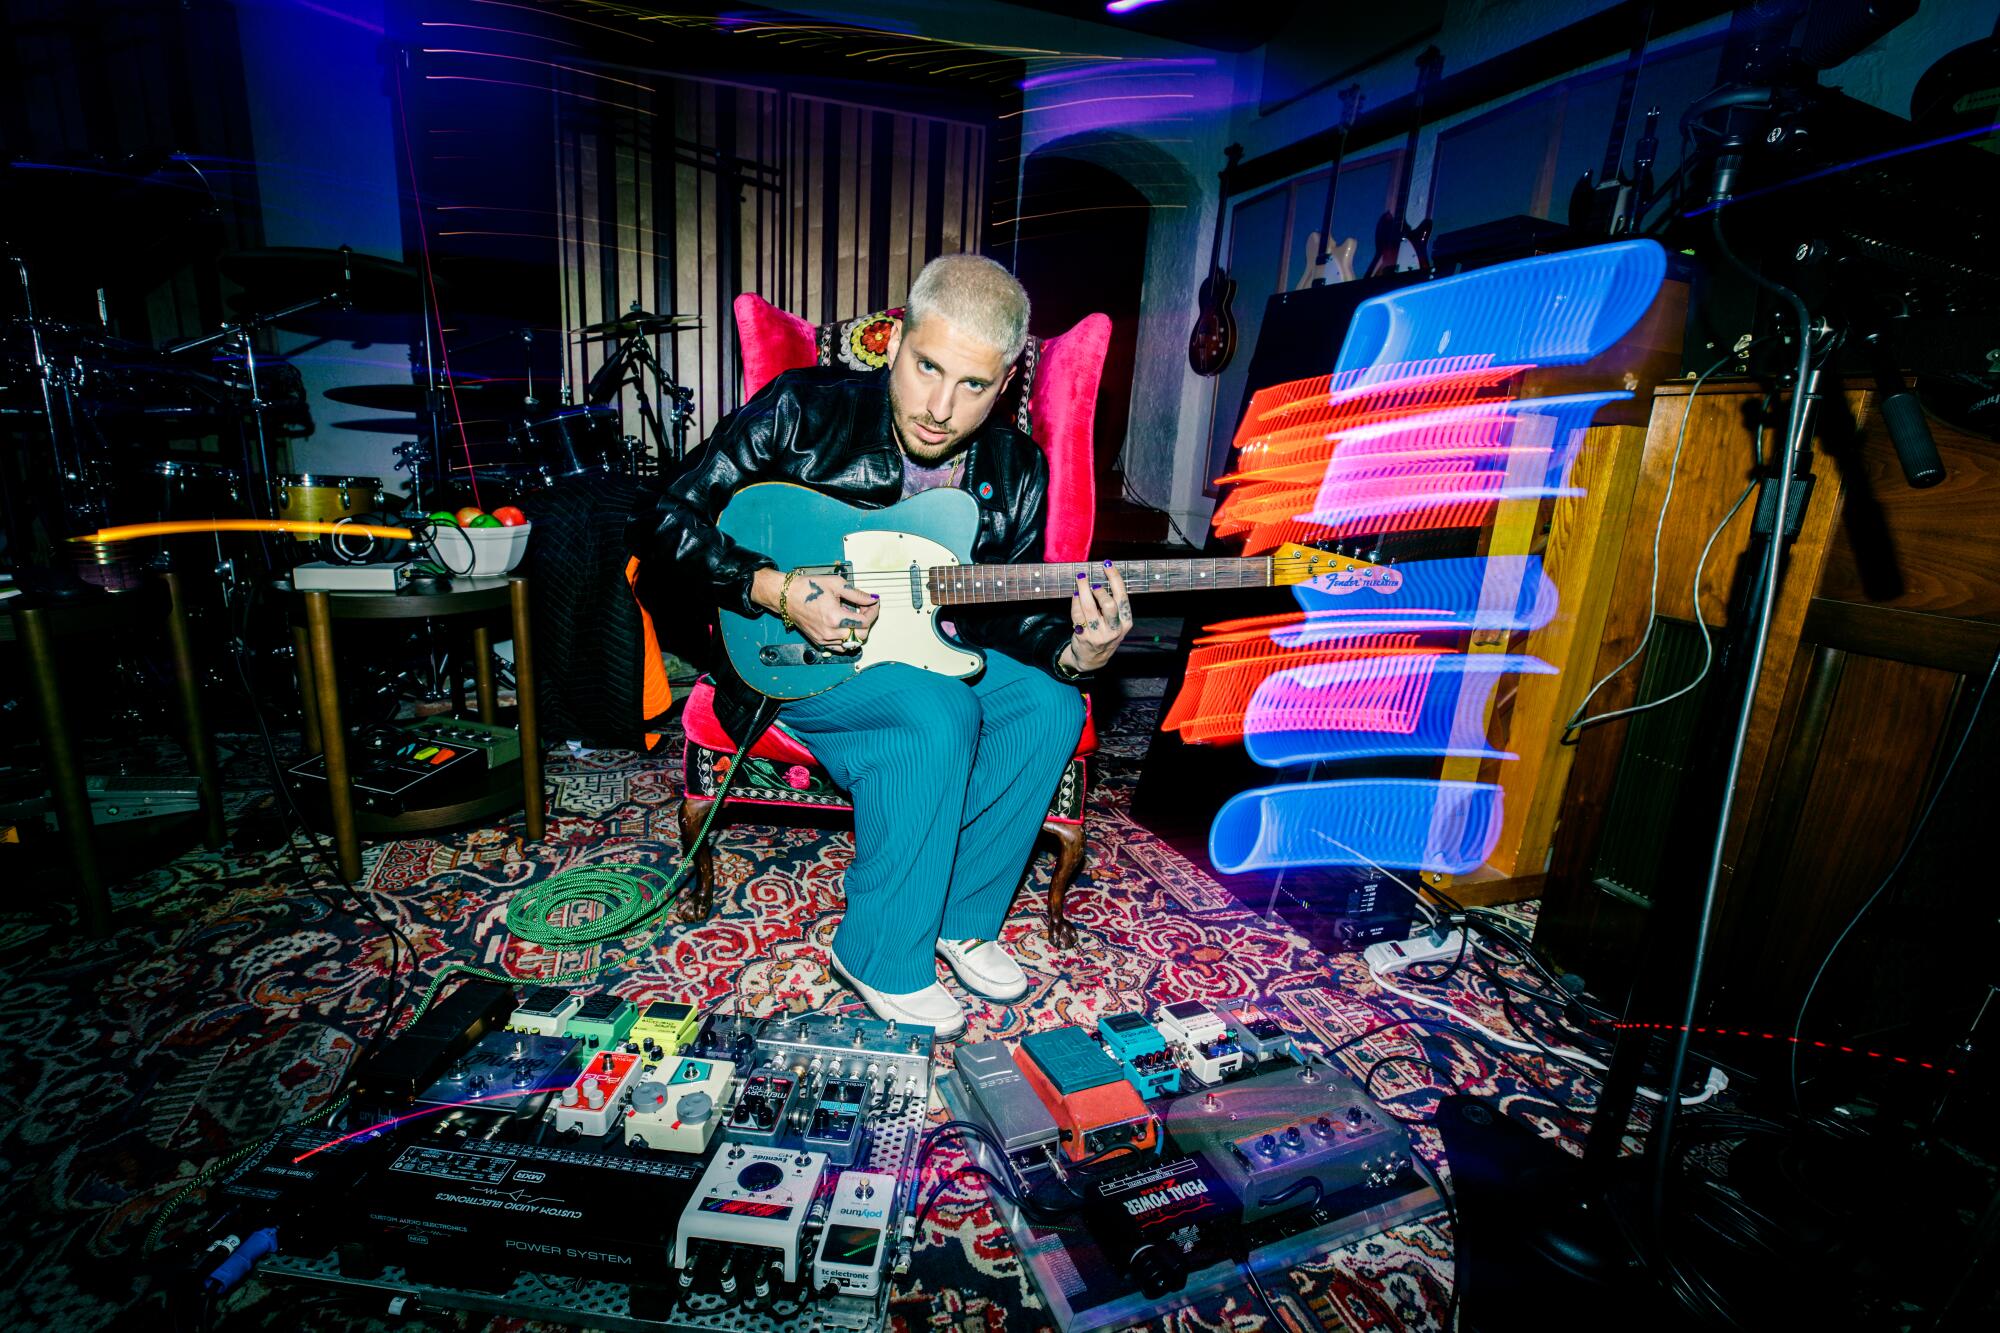 A producer/musician in his studio, playing electric guitar and surrounded by effects pedals.